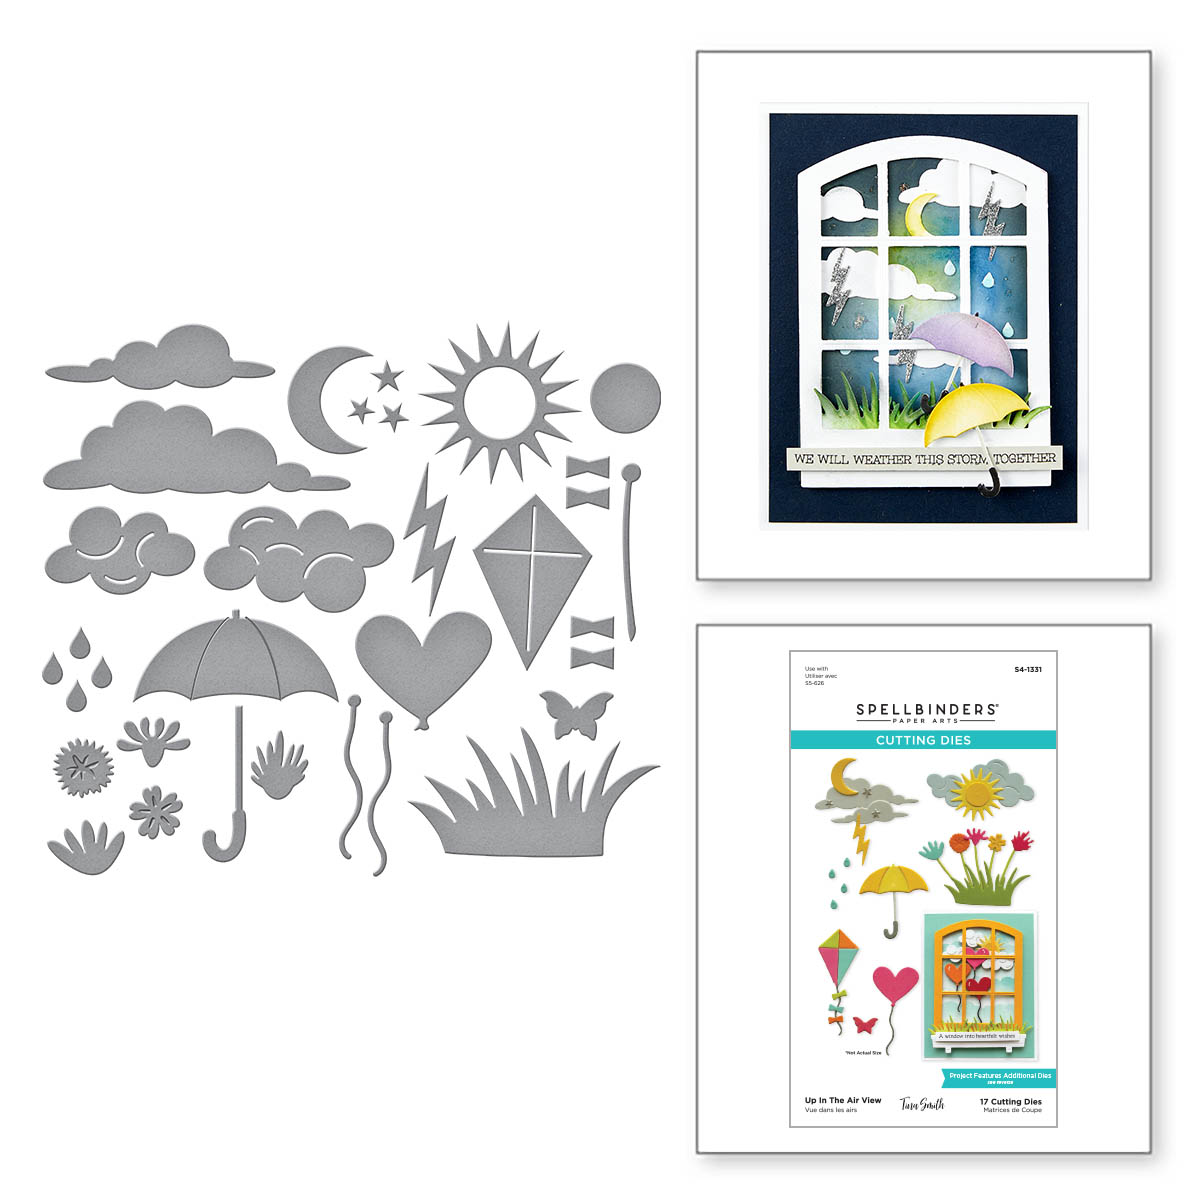 Spellbinders Up in the Air View Etched Dies From the Windows With A View Collection By Tina Smith